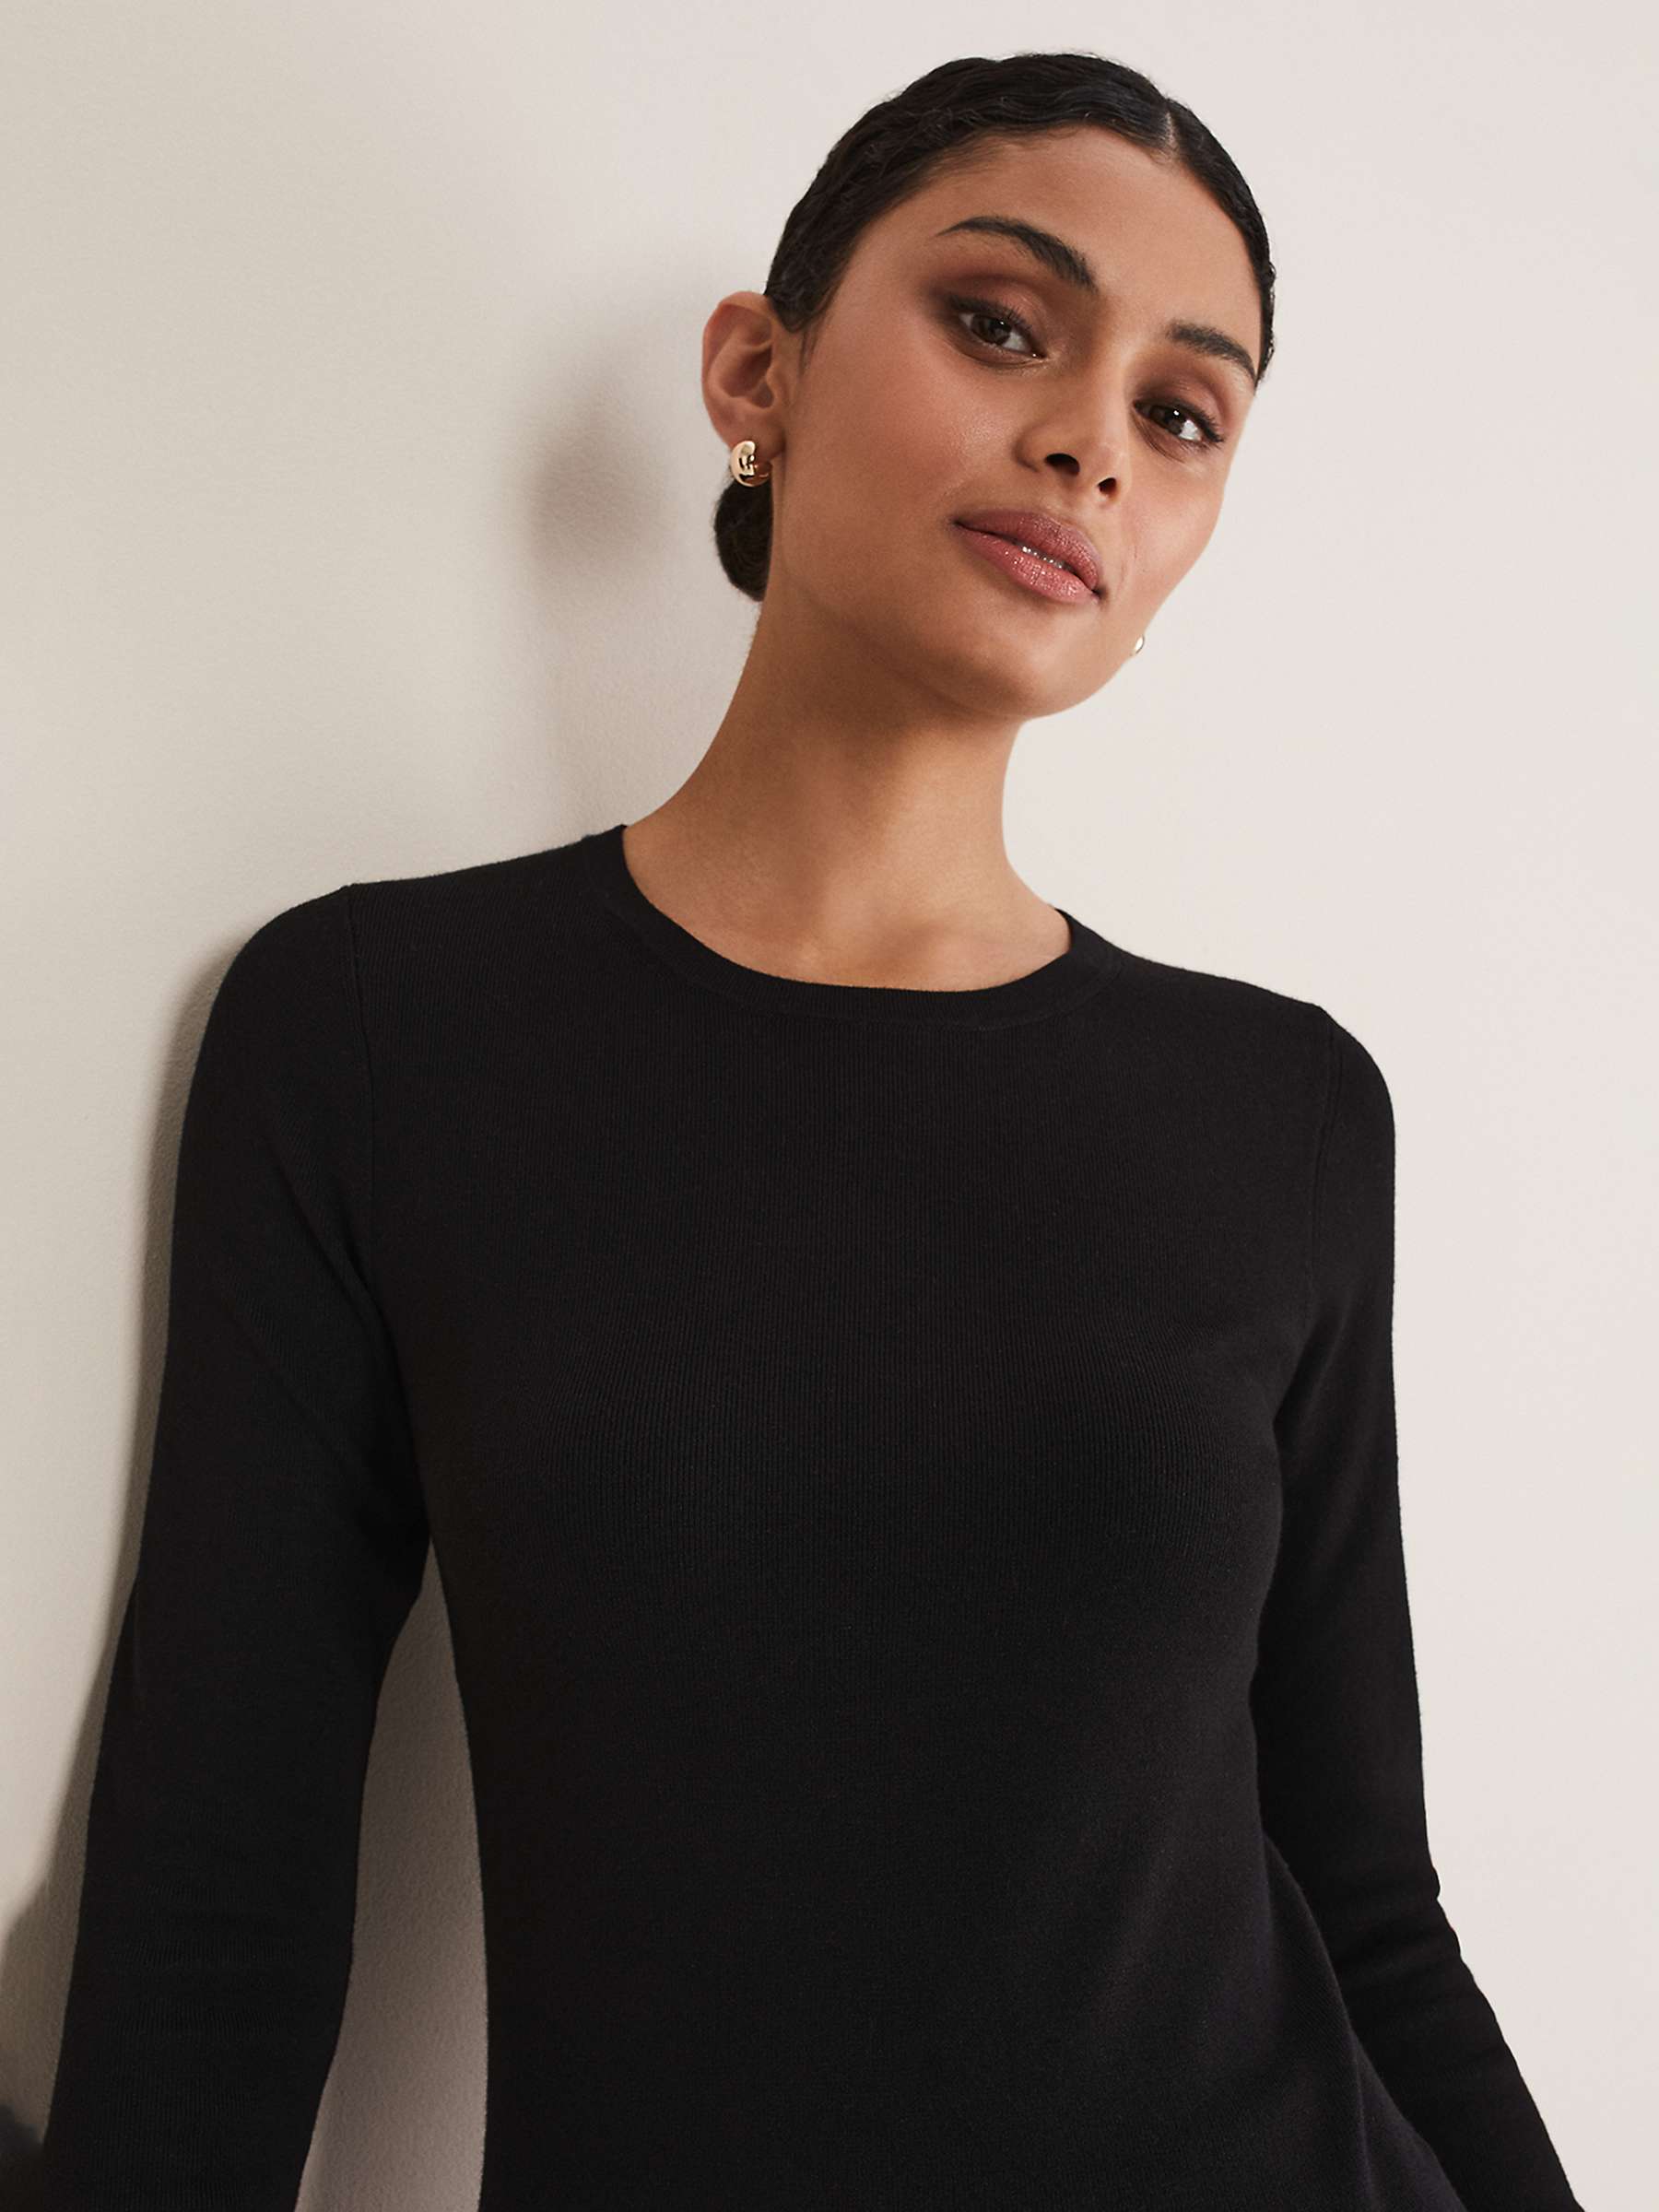 Buy Phase Eight Molla Crew Neck Top Online at johnlewis.com